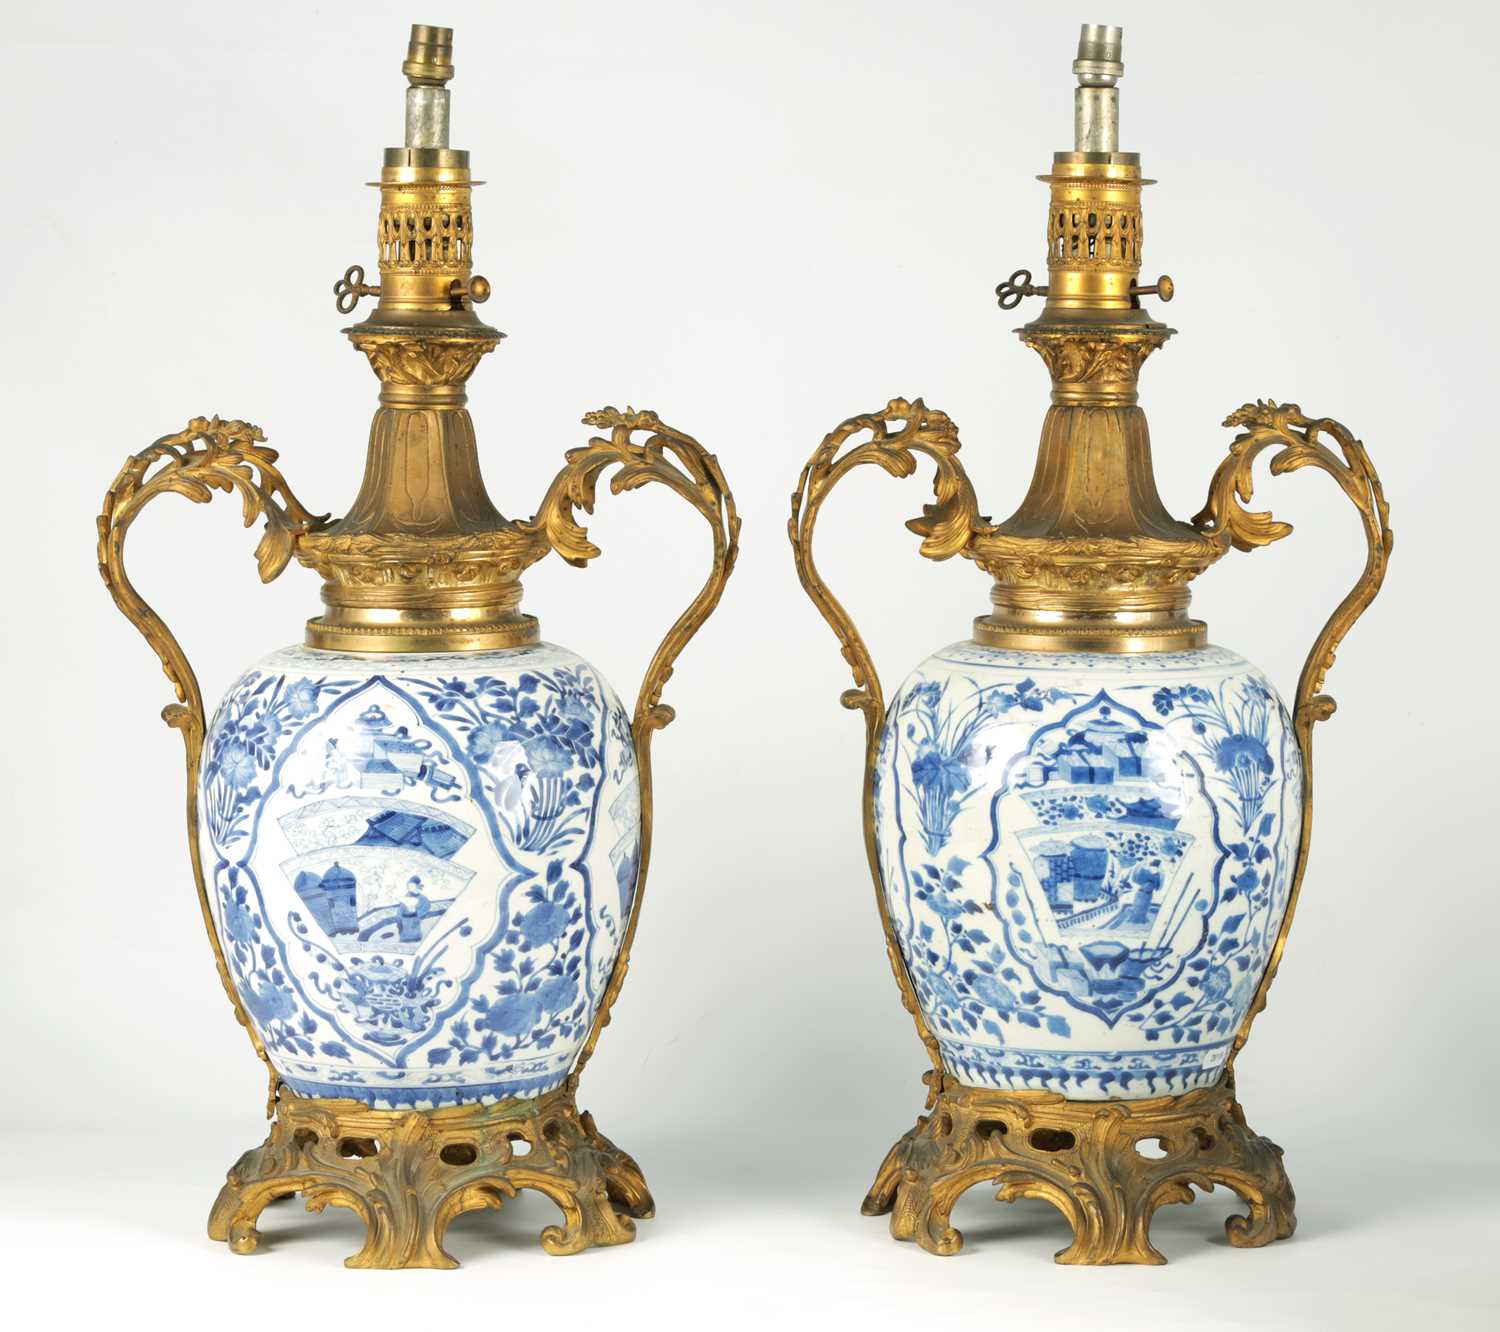 Lot 128 - A LARGE MATCHED PAIR OF 18TH CHINESE BLUE AND WHITE GINGER JARS, LATER CONVERTED TO LAMPS